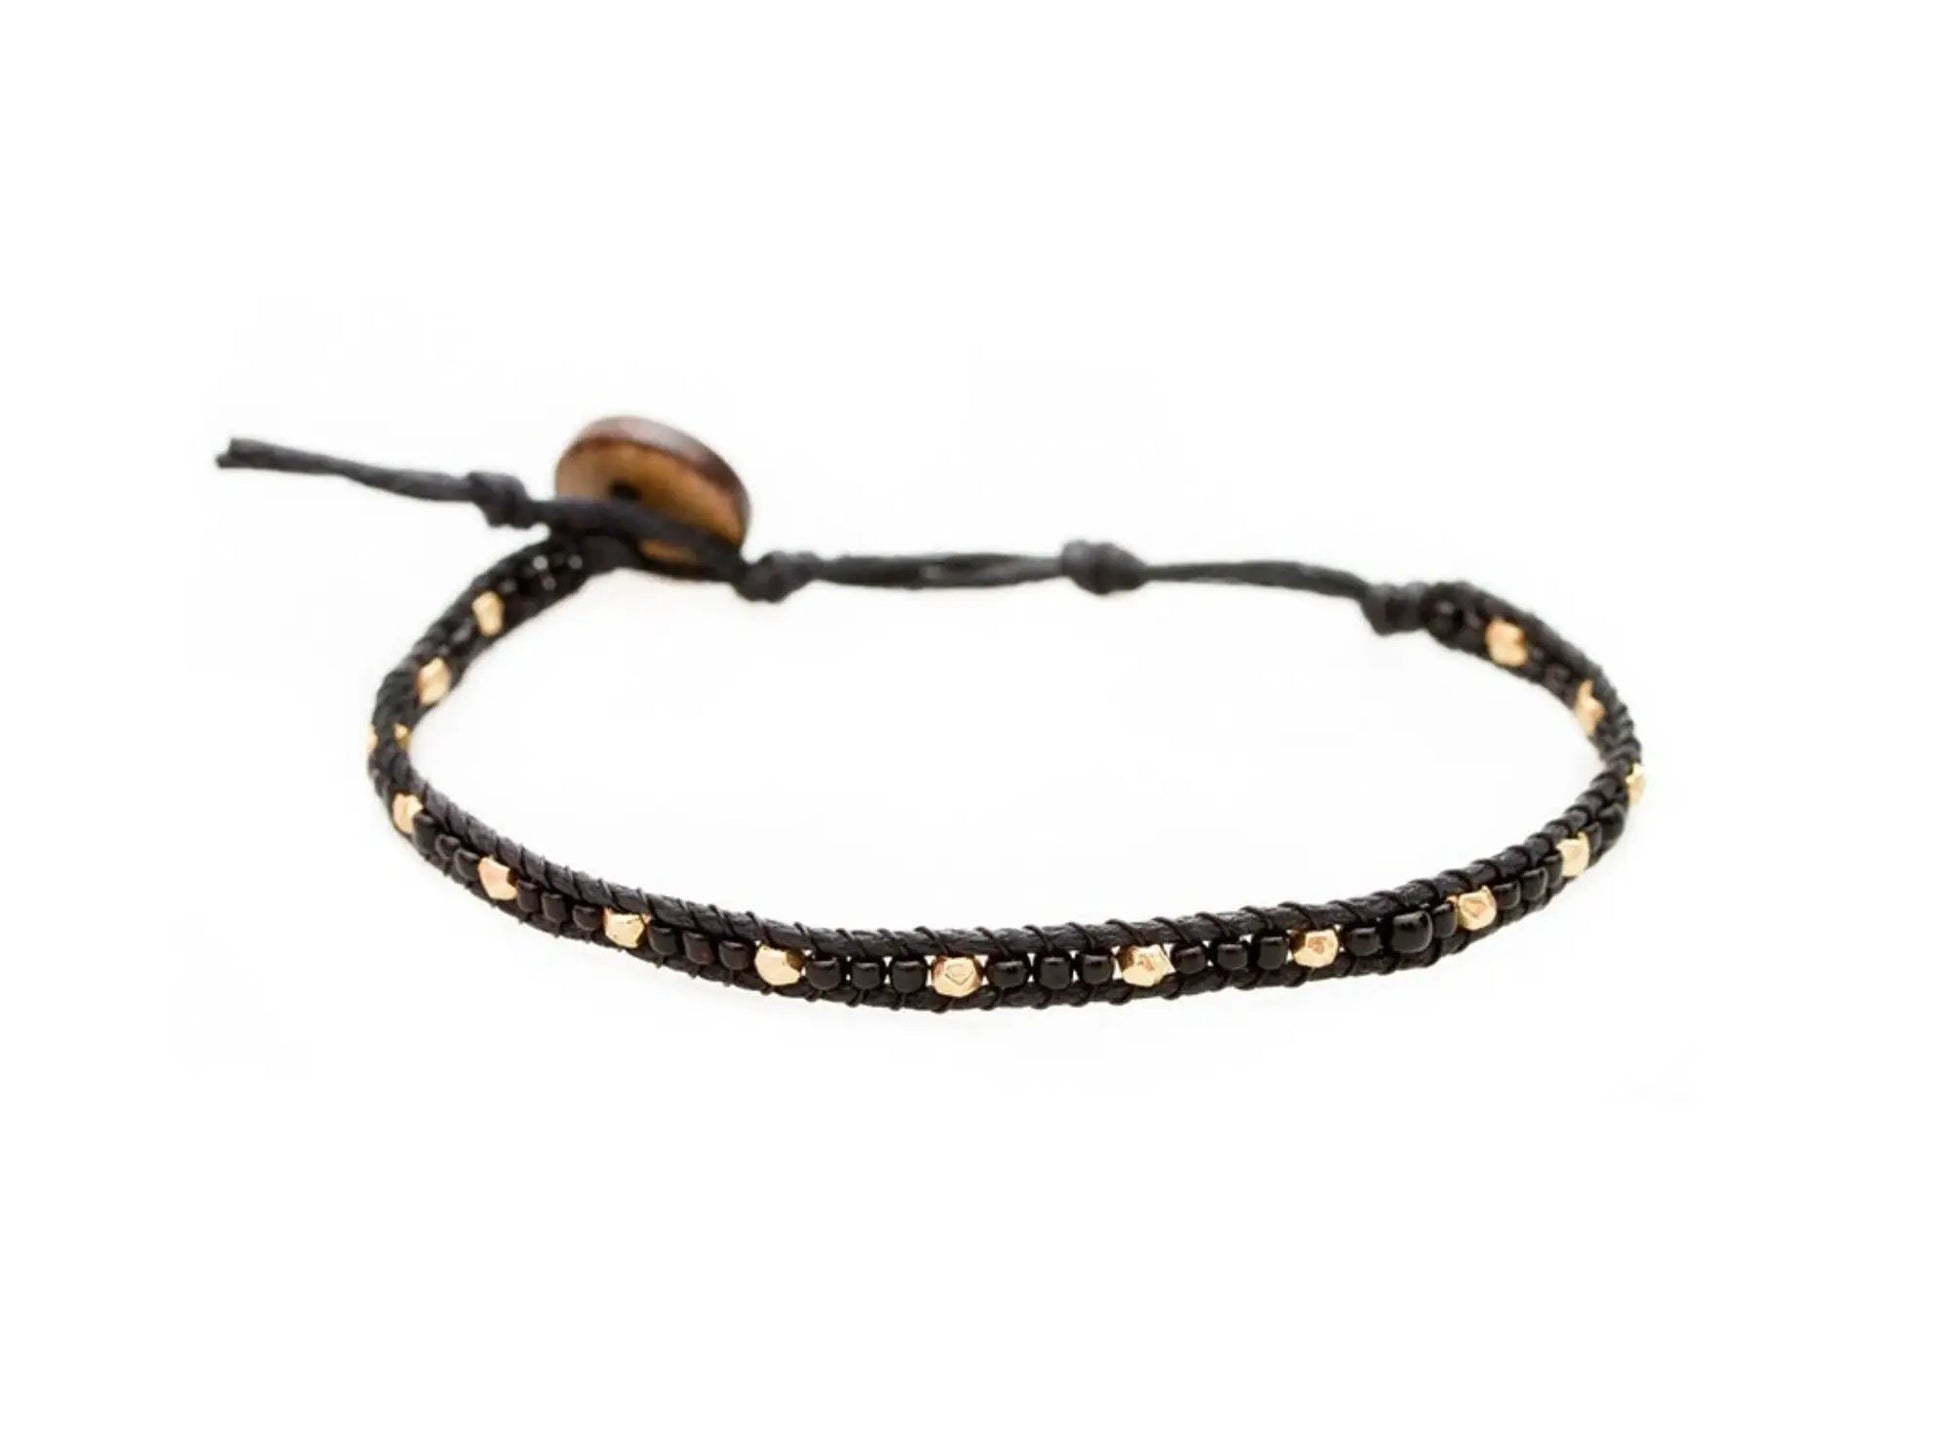 Lotus and Luna Ball Drop Bracelet. Black and gold seed beads on an adjustable cotton cord with coconut button closure.